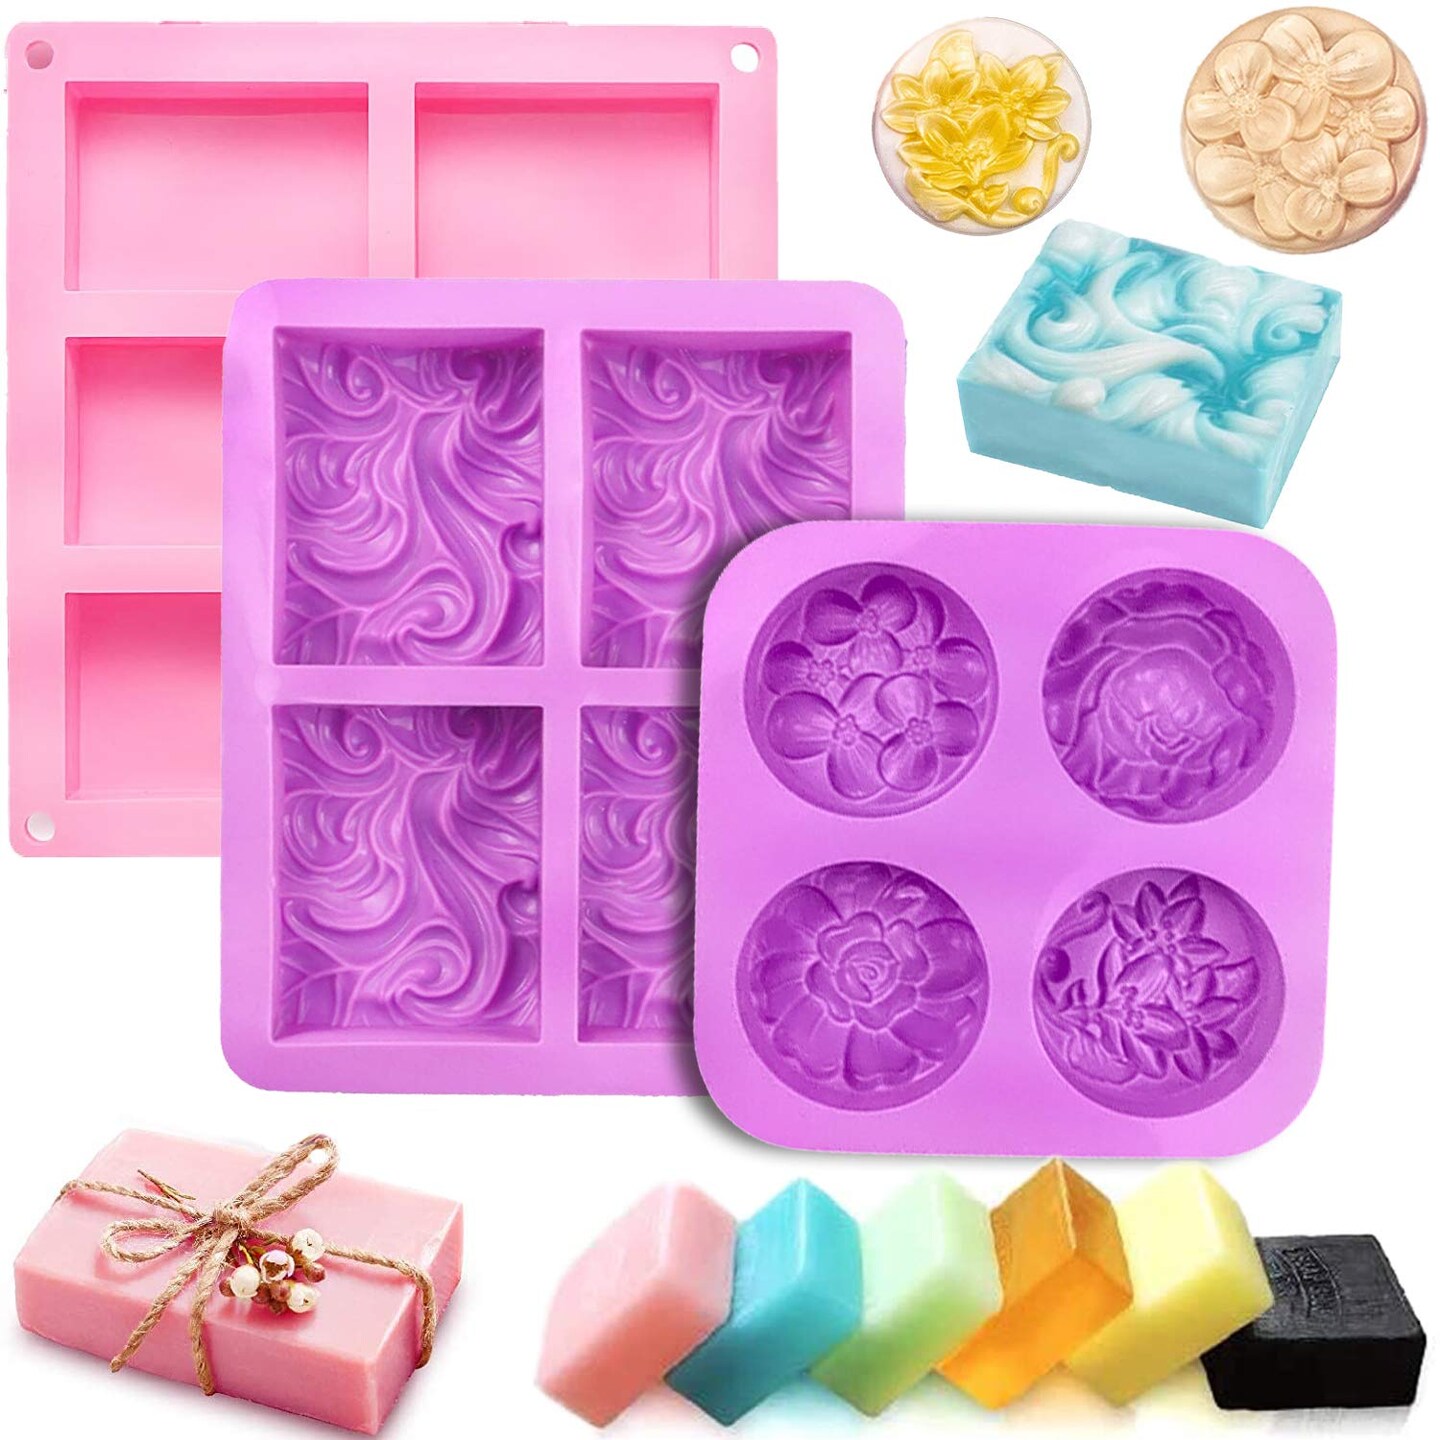 3 Pack Silicone Soap Molds 6 Cavities Silicone Soap Mold Rectangle Oval and Flower Shapes Soap Molds for Soap Making Handmade Cake Chocolate Biscuit Pudding Jelly Ice Cube Tray